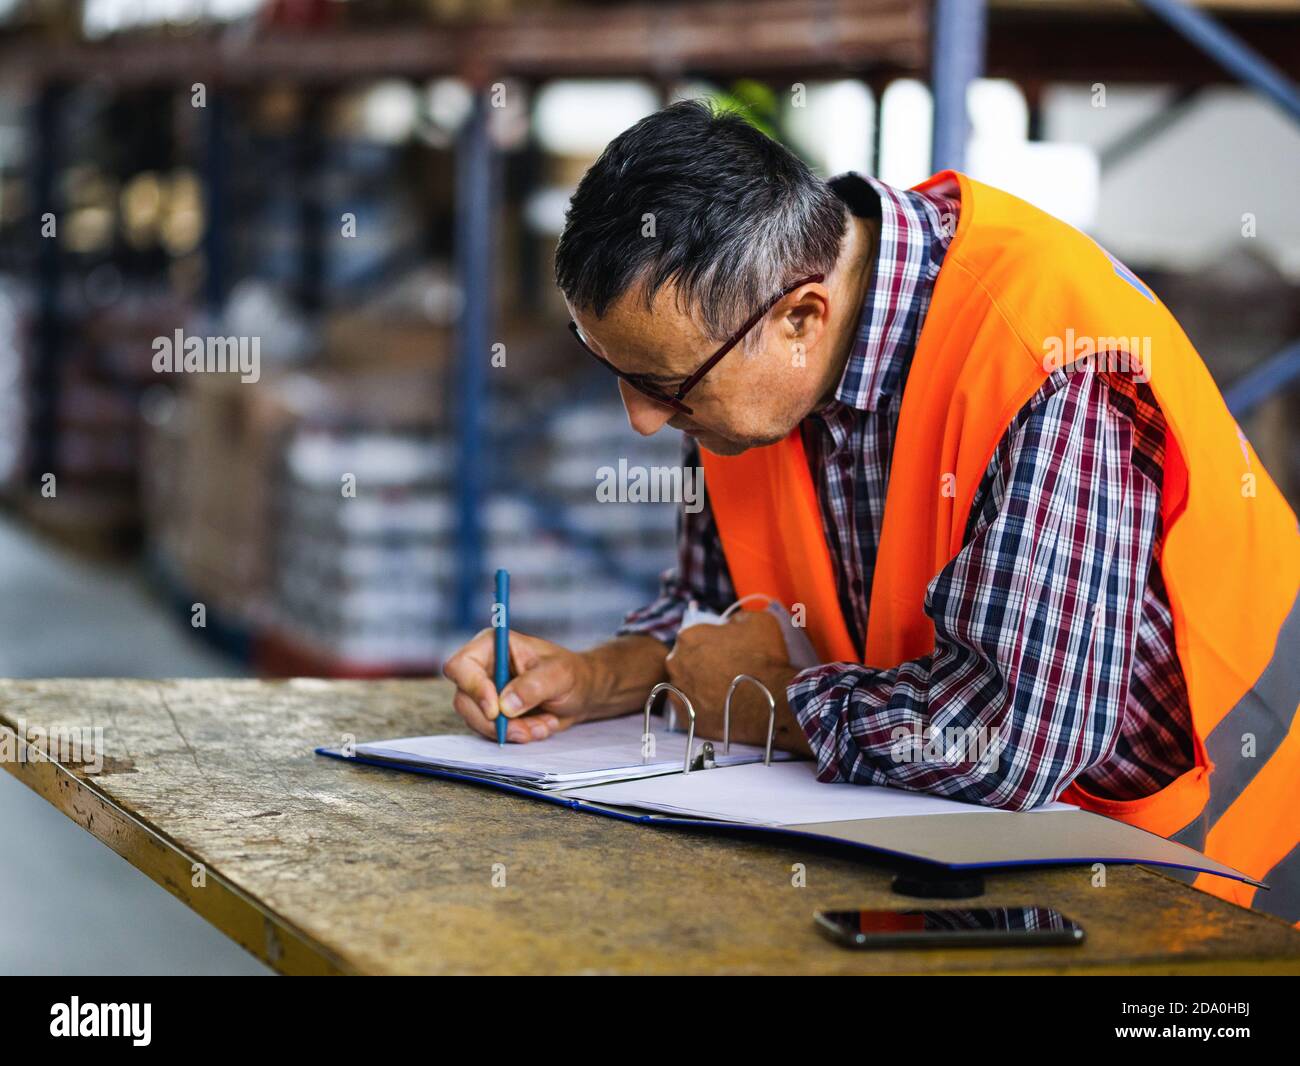 Side view adult worker wearing uniform writing on clipboard while working in spacious storehouse Stock Photo